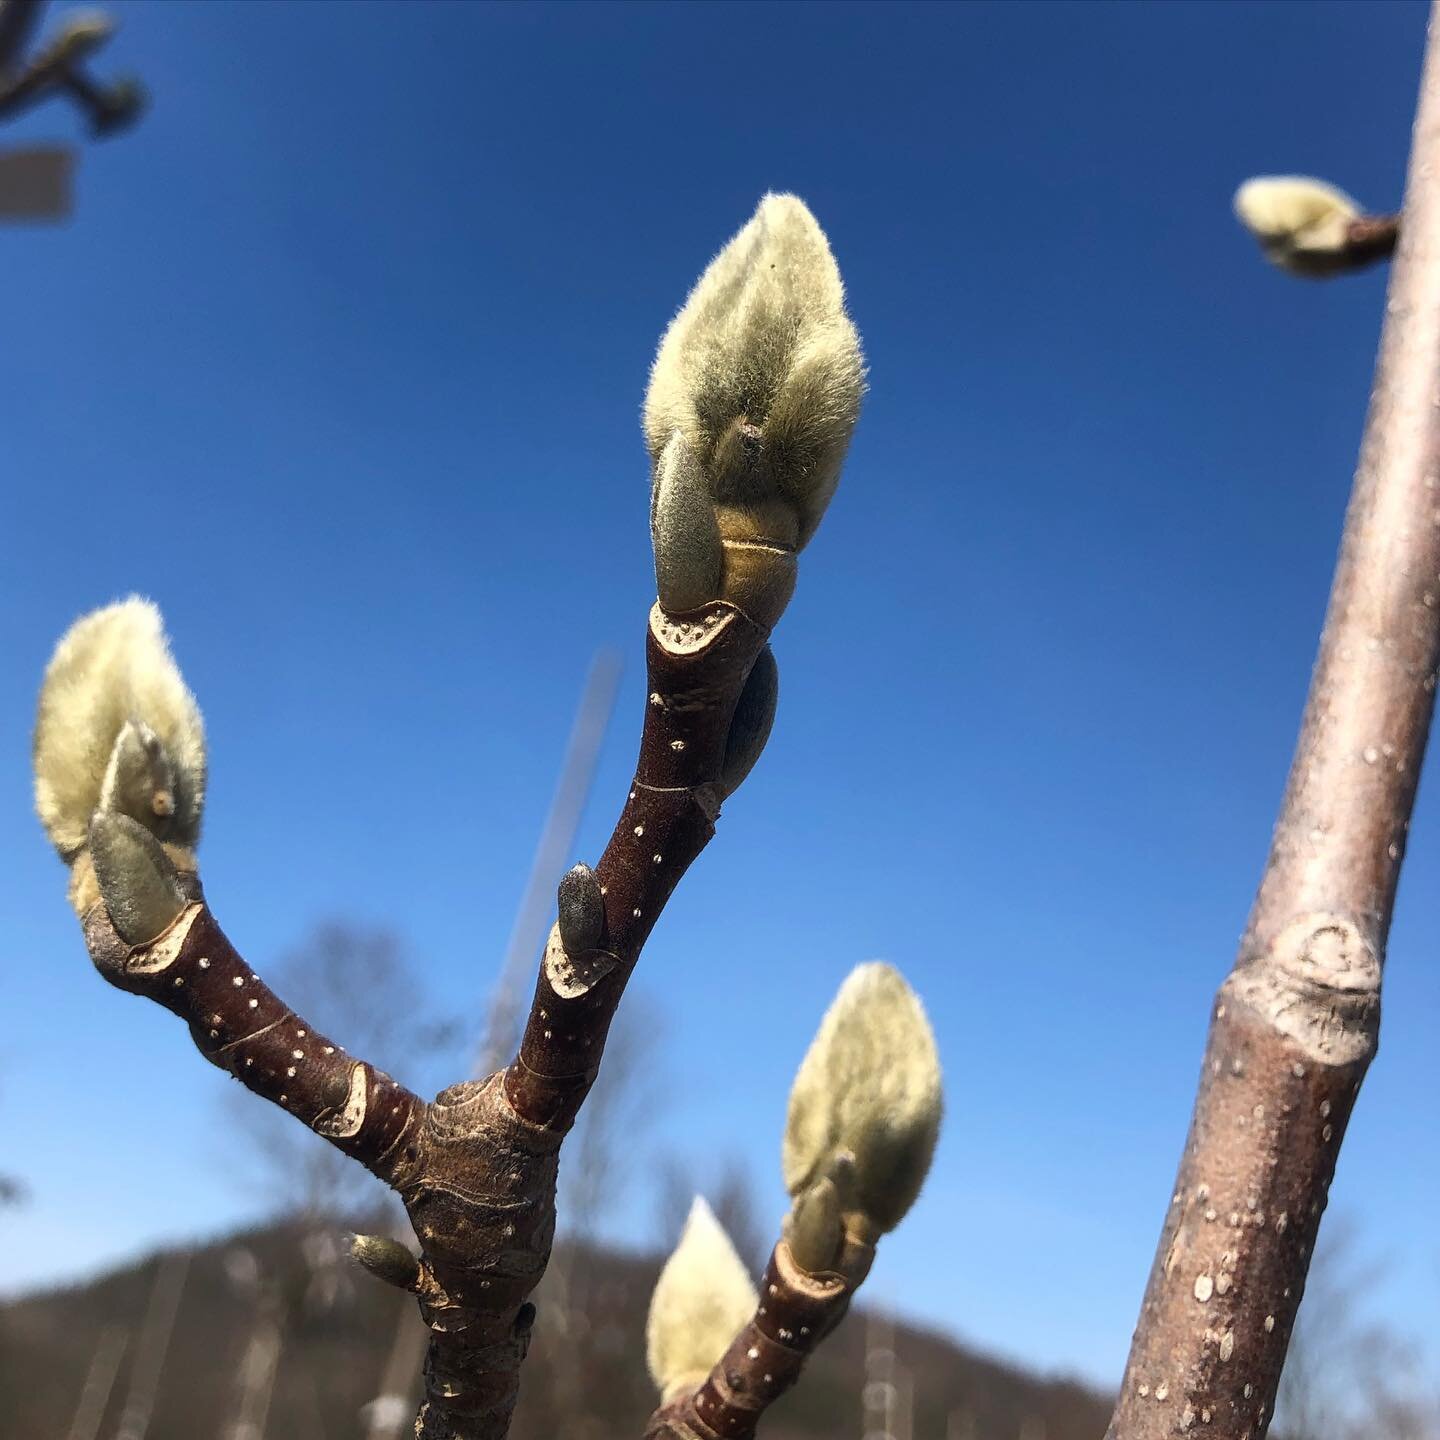 We&rsquo;ve got some budding! Any guesses on what kind this is? ....... Hope you get to enjoy this nice break of March weather these next couple day before the famous upstate early spring weather returns!! #spring #upstateny #buds #popquiz #trees #na